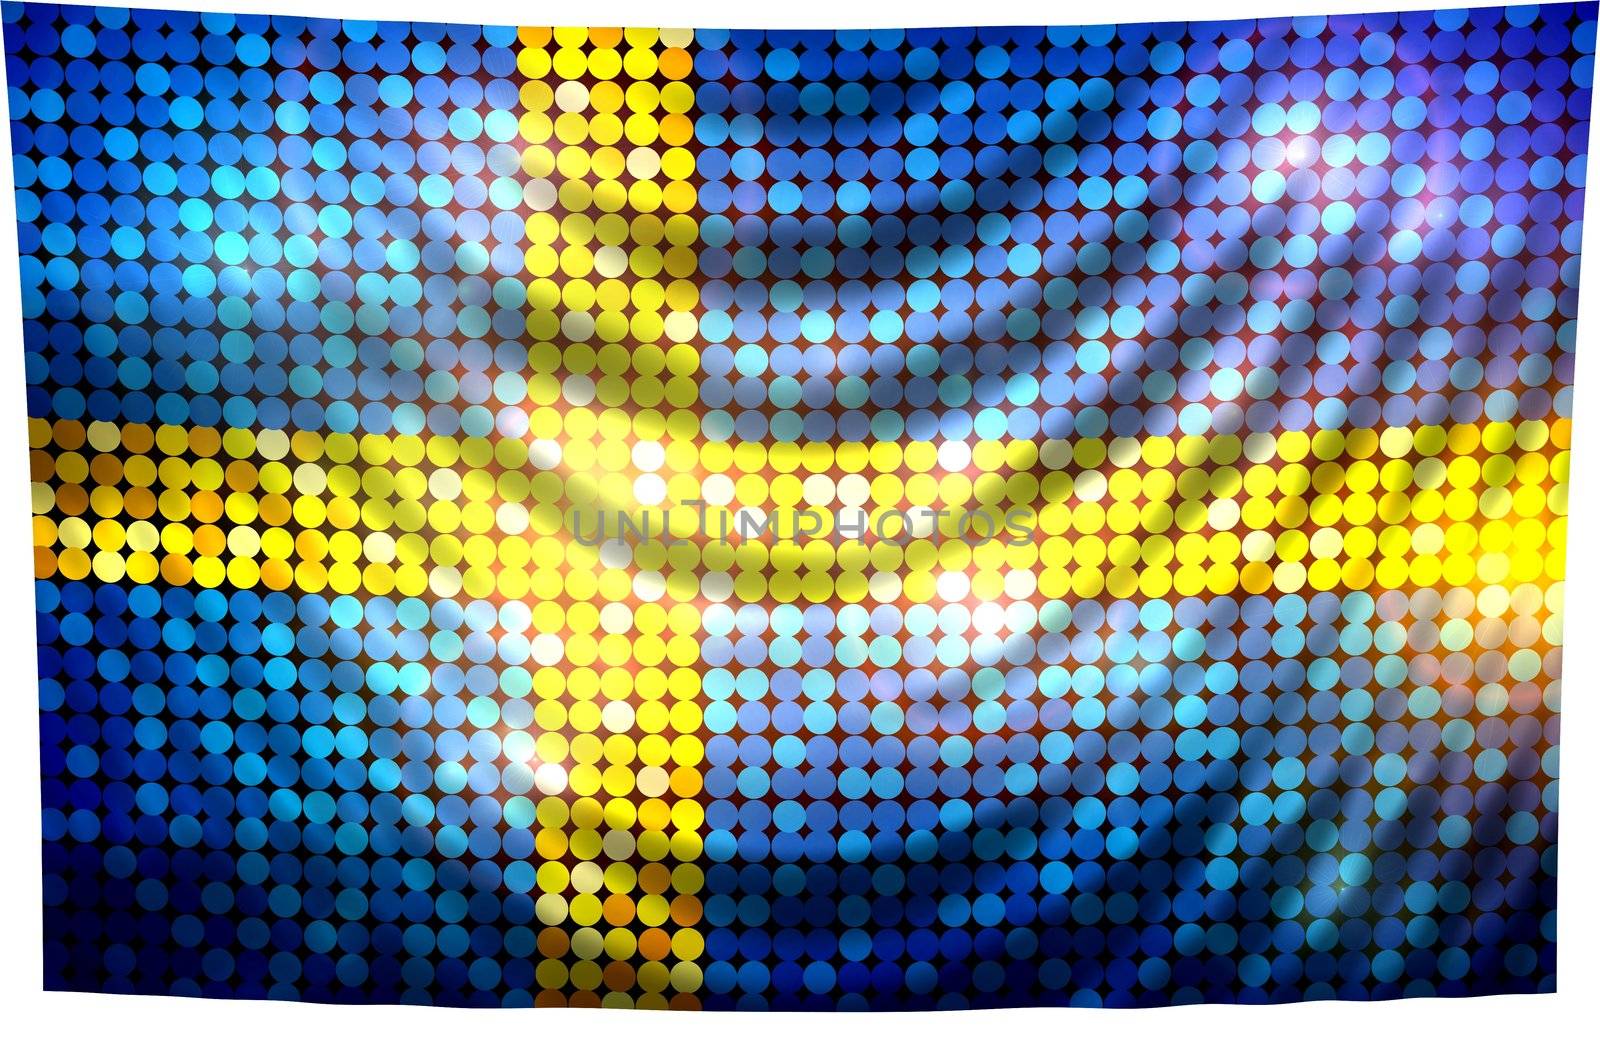 Sparkling Flag of Sweden by peromarketing